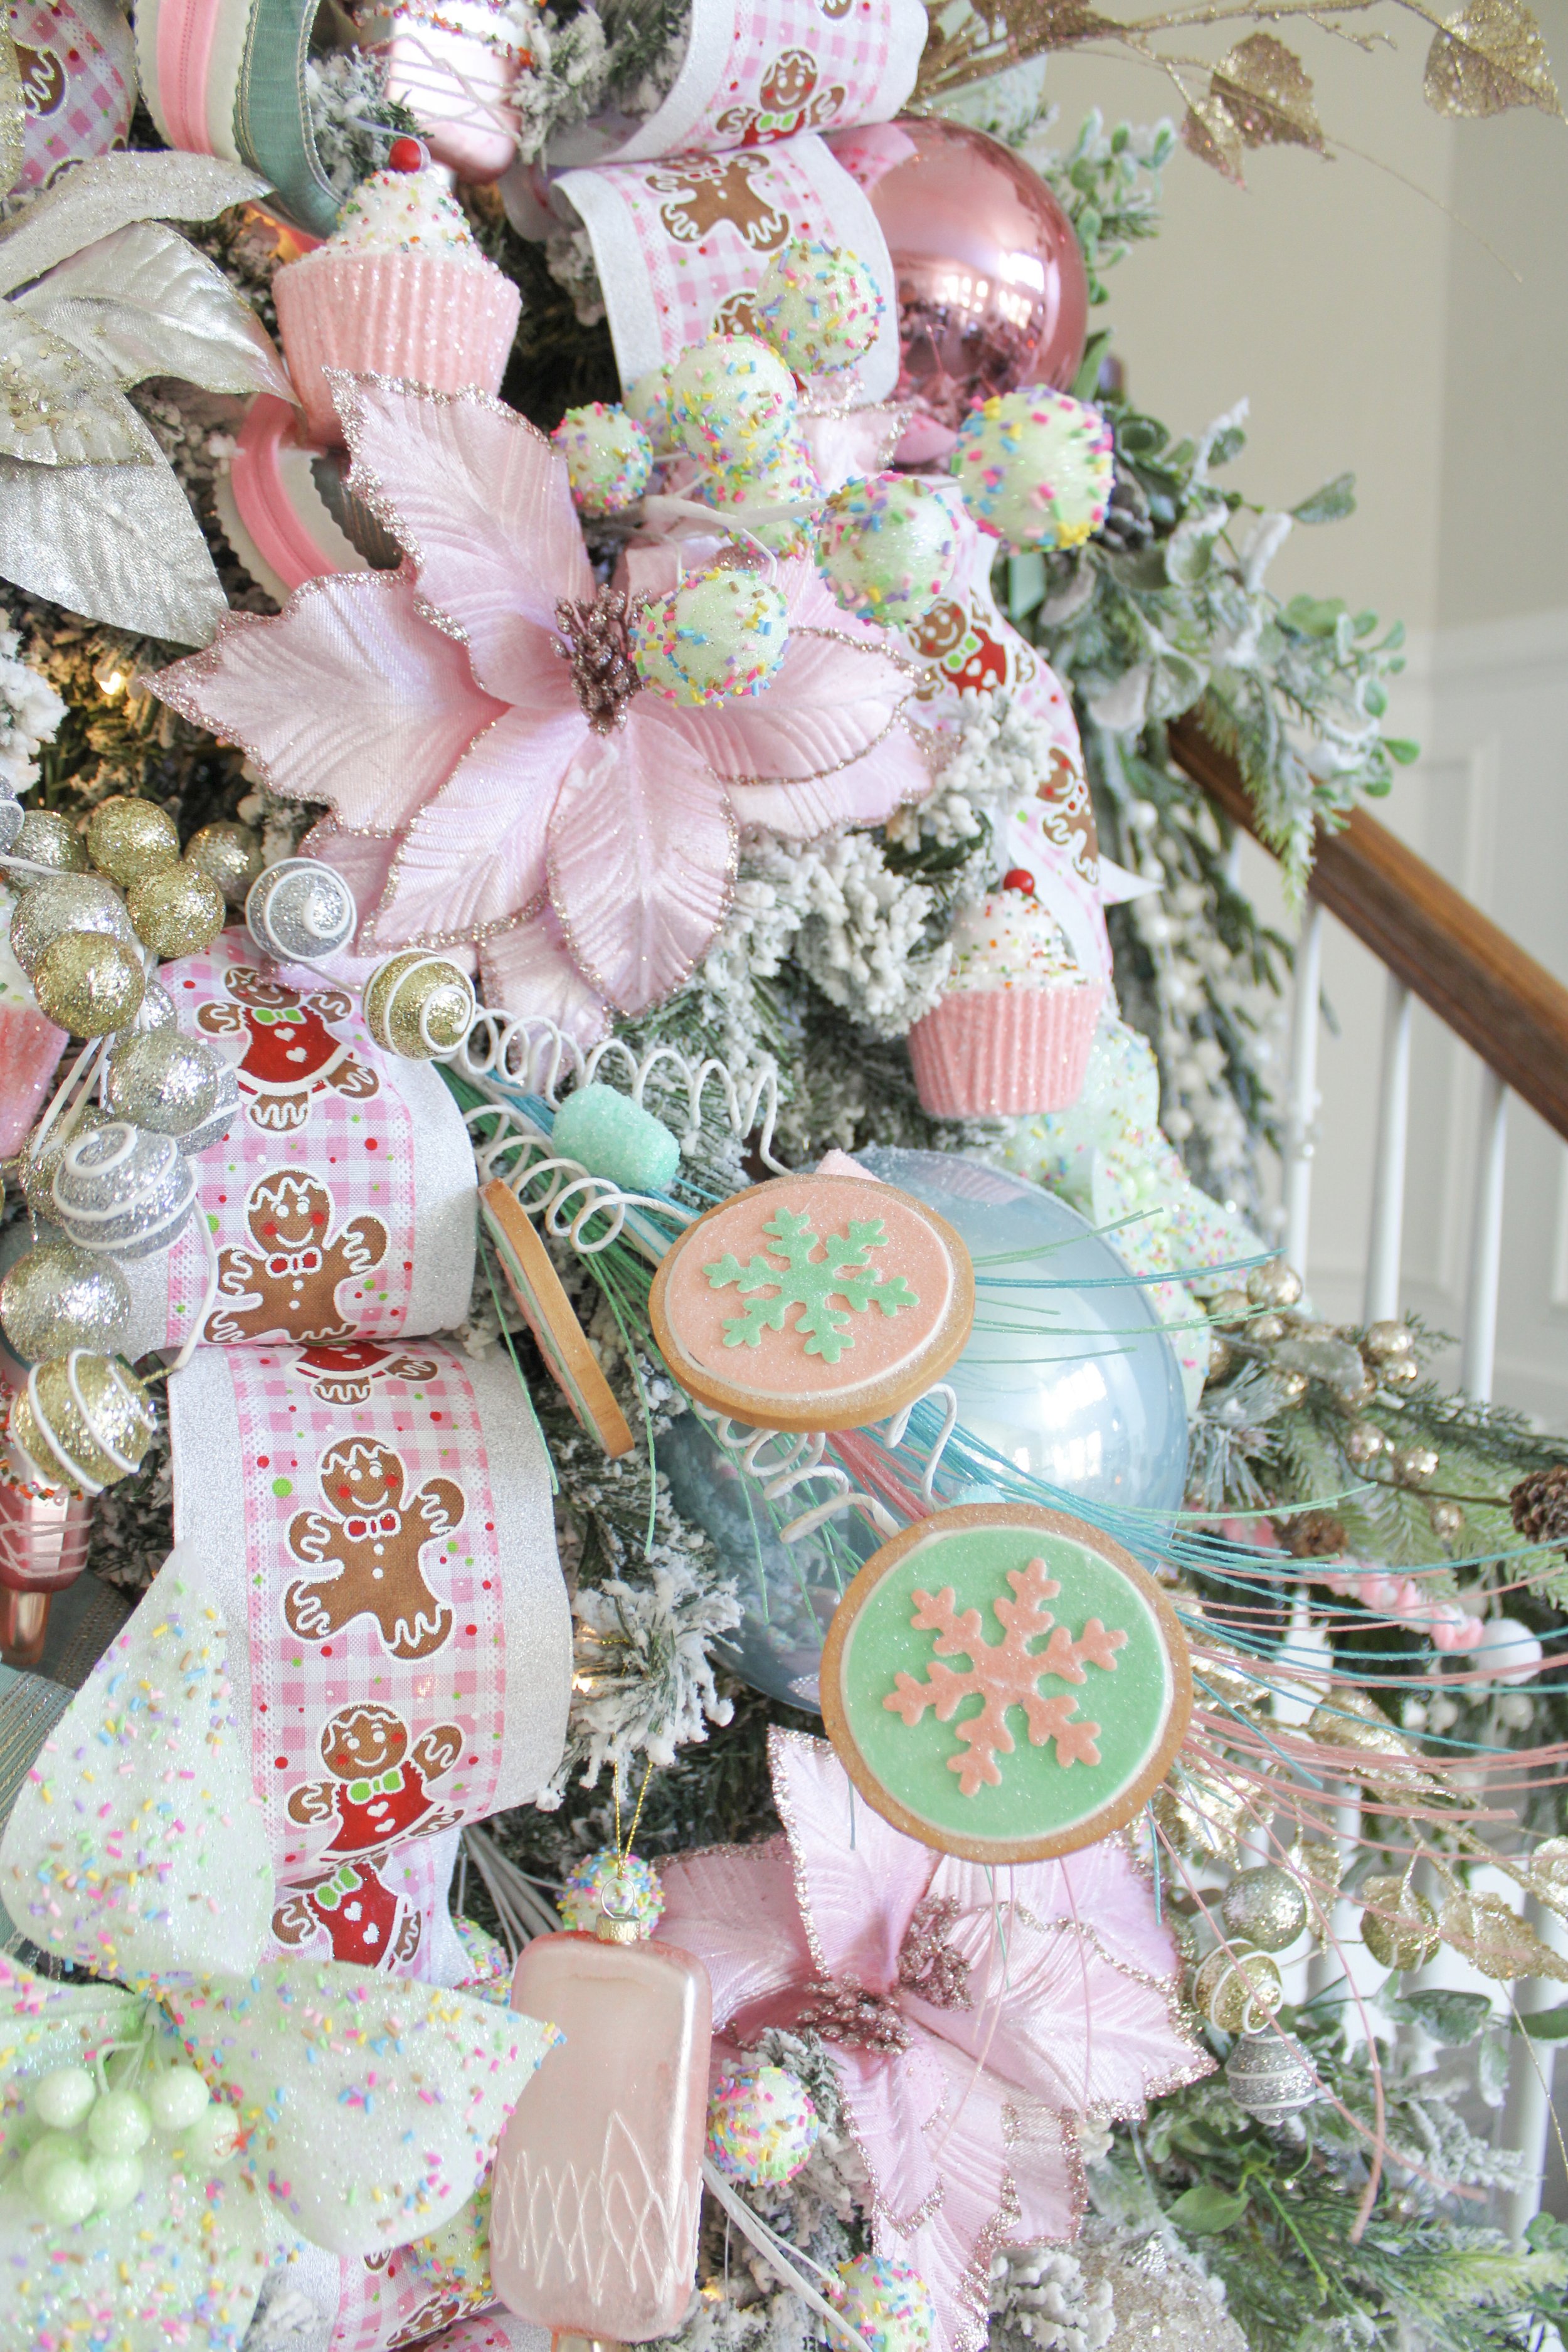 DIY Rose Petal Holiday Tree - Courtney's Sweets